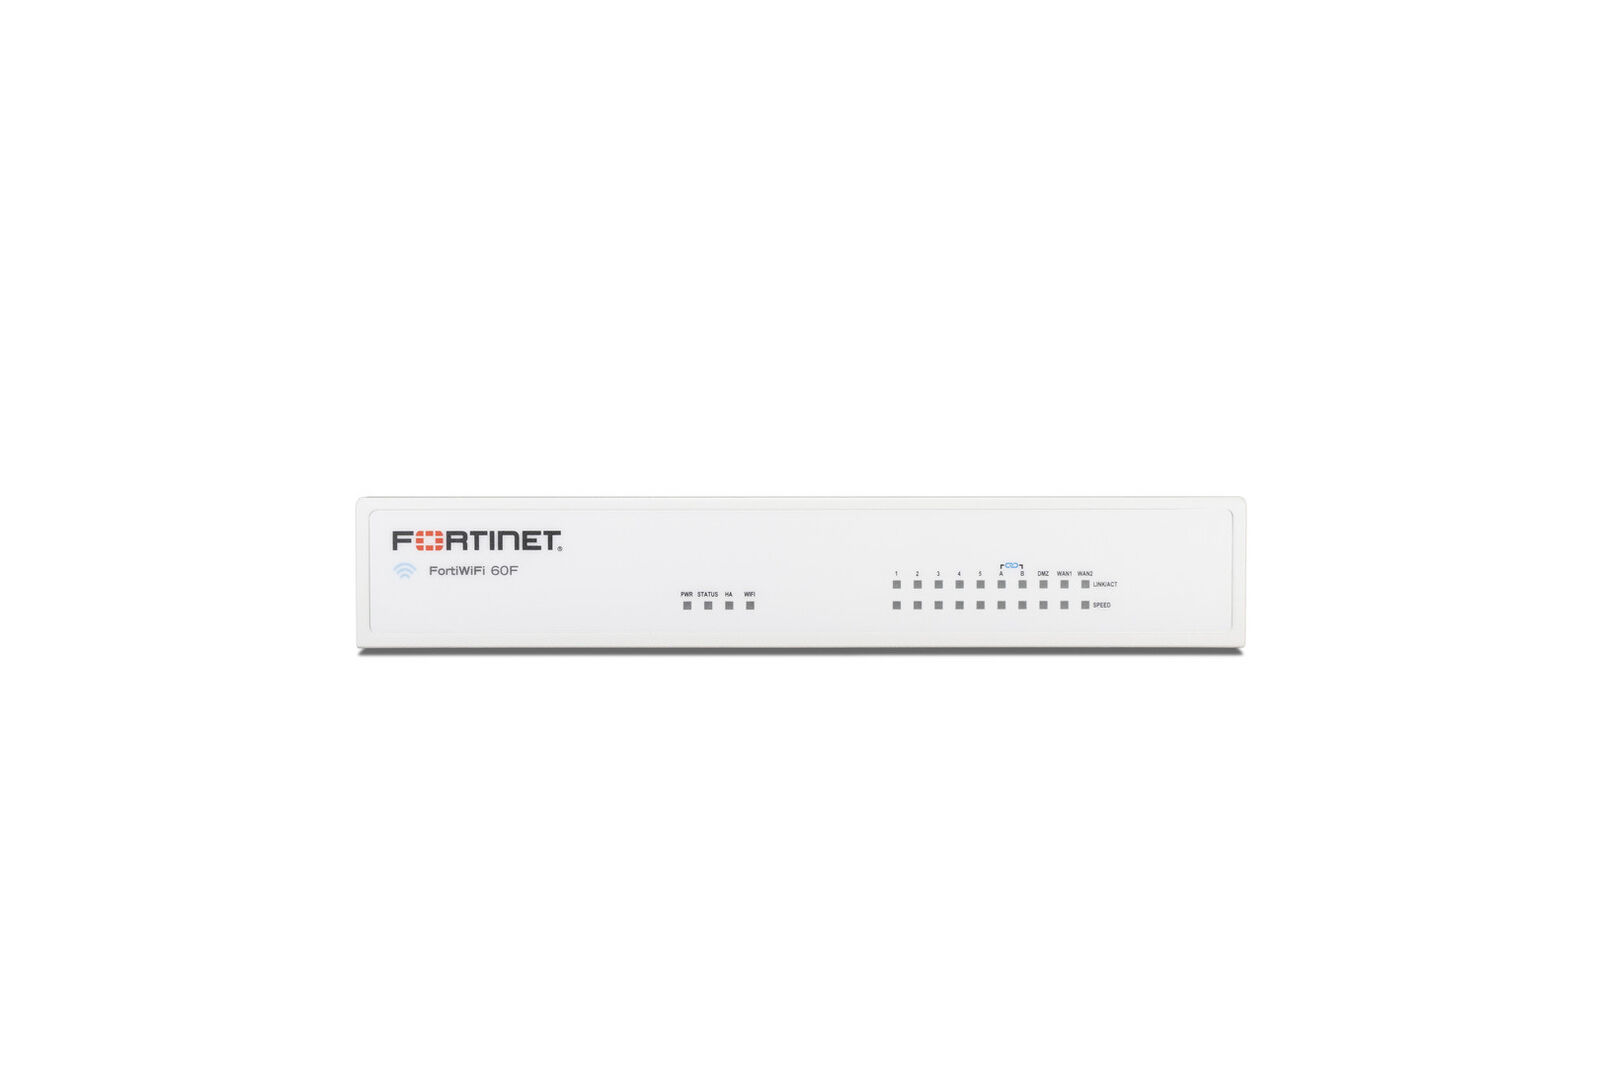 Fortinet FortiWifi 60F Network Security Appliance EXP 5/6/2024 (FWF-60F-A)- New